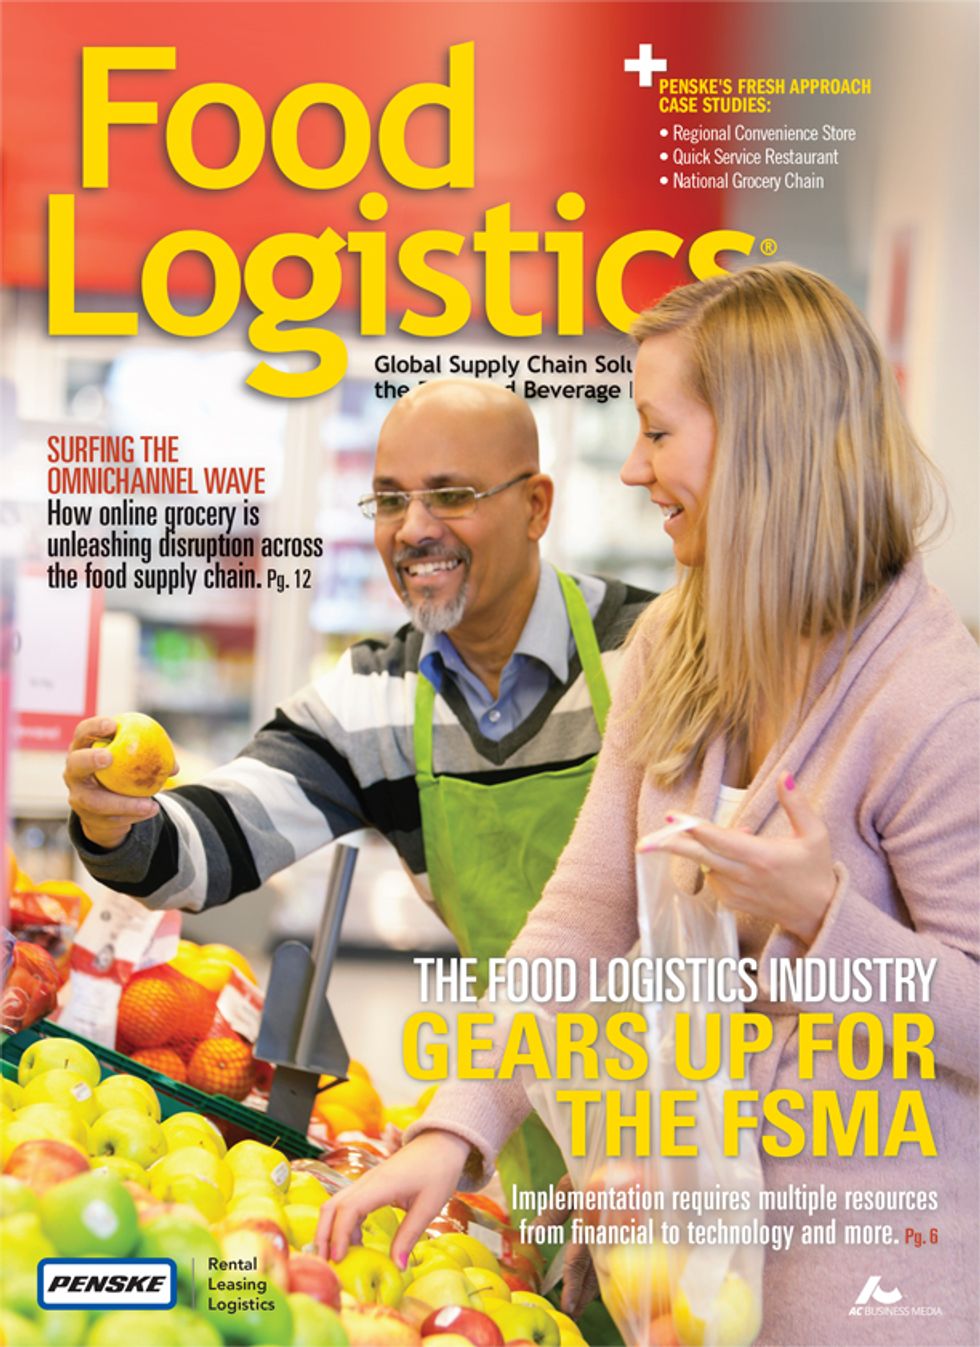 
Food Logistics Magazine and Penske Team Up for Special Edition
